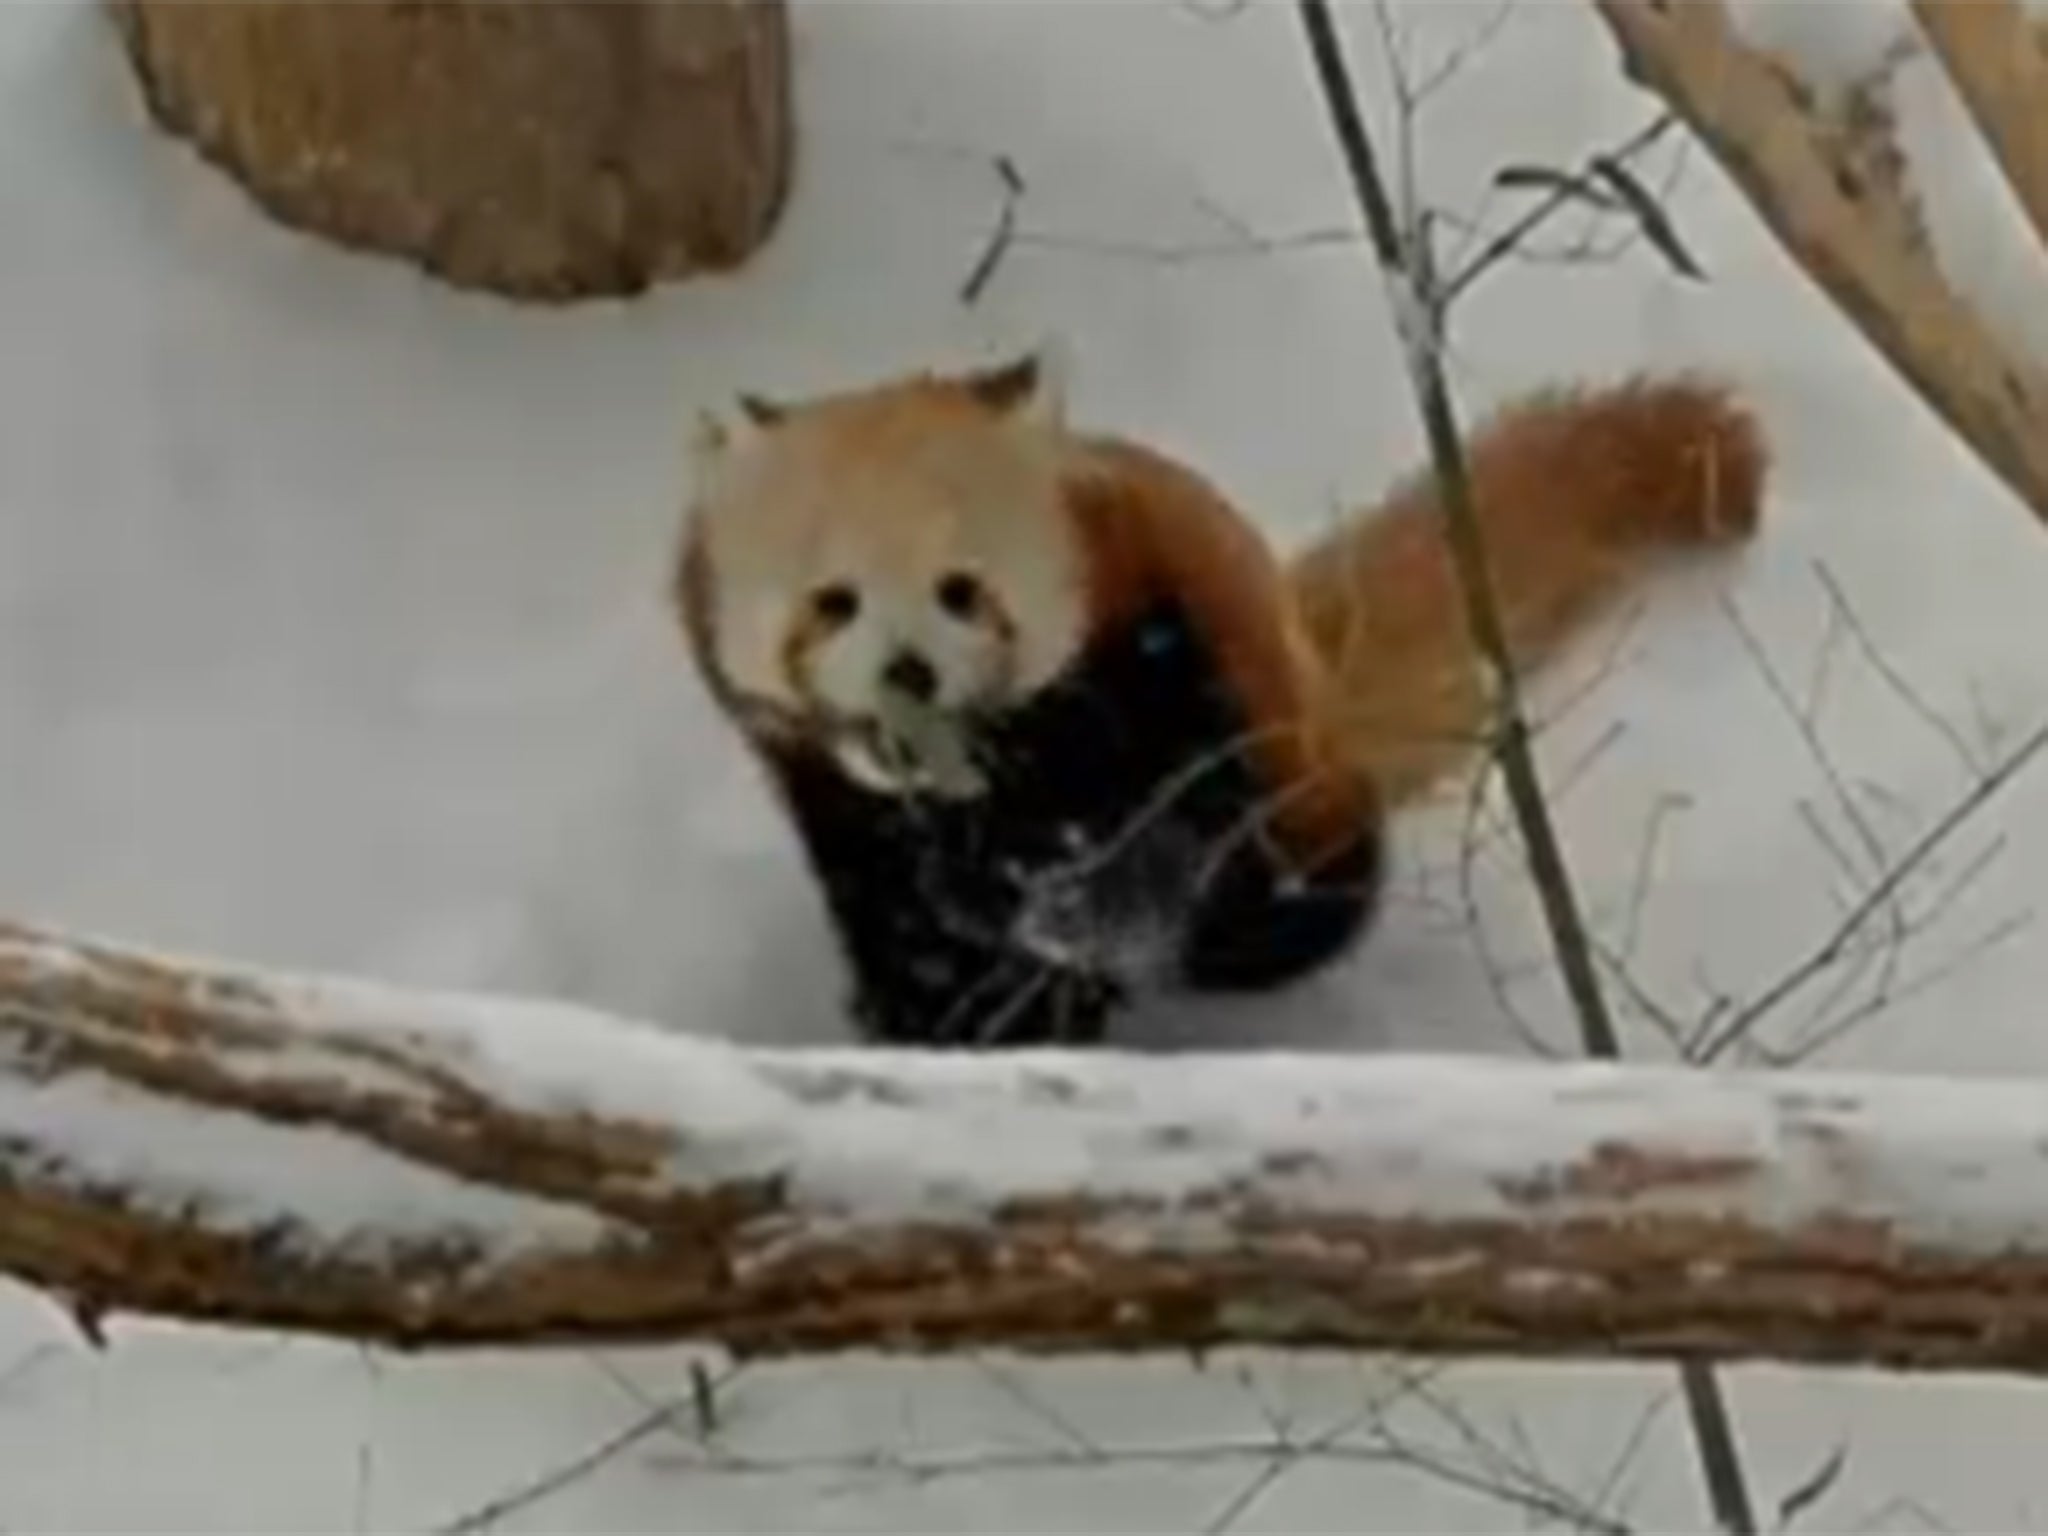 The little red panda plays in the snow in New York